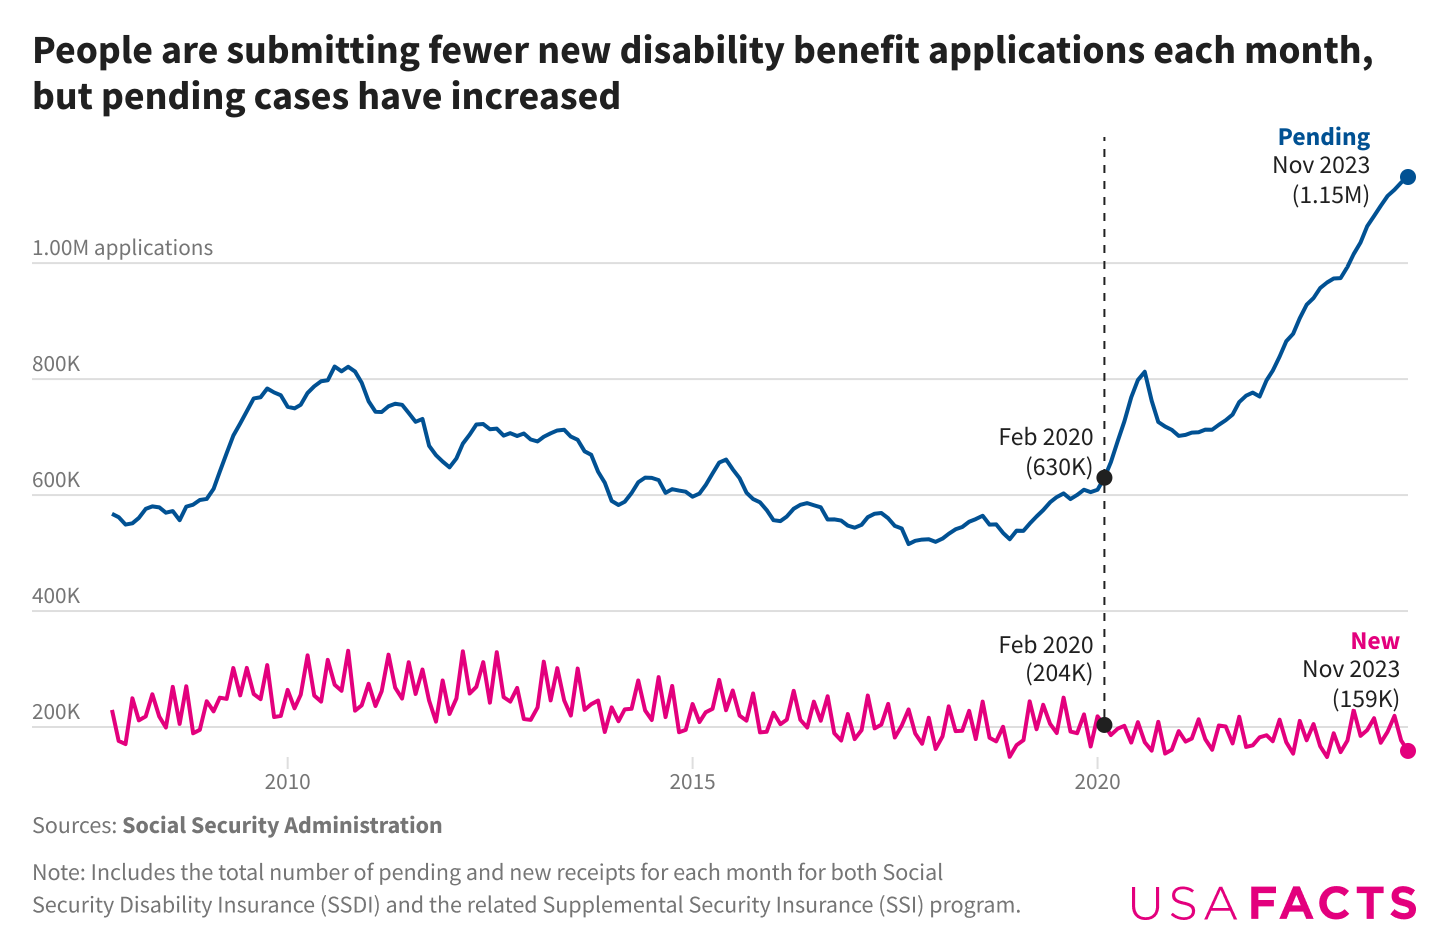 A line chart showing growth change in new disability applications and application backlog over time. New applications remain relatively consistent, between 150k and 300k. Between 2016 and Feb 2020, application backlogs remained around 600k. But this has increased since 2020, reaching a new high of 1.15 million in November 2023.